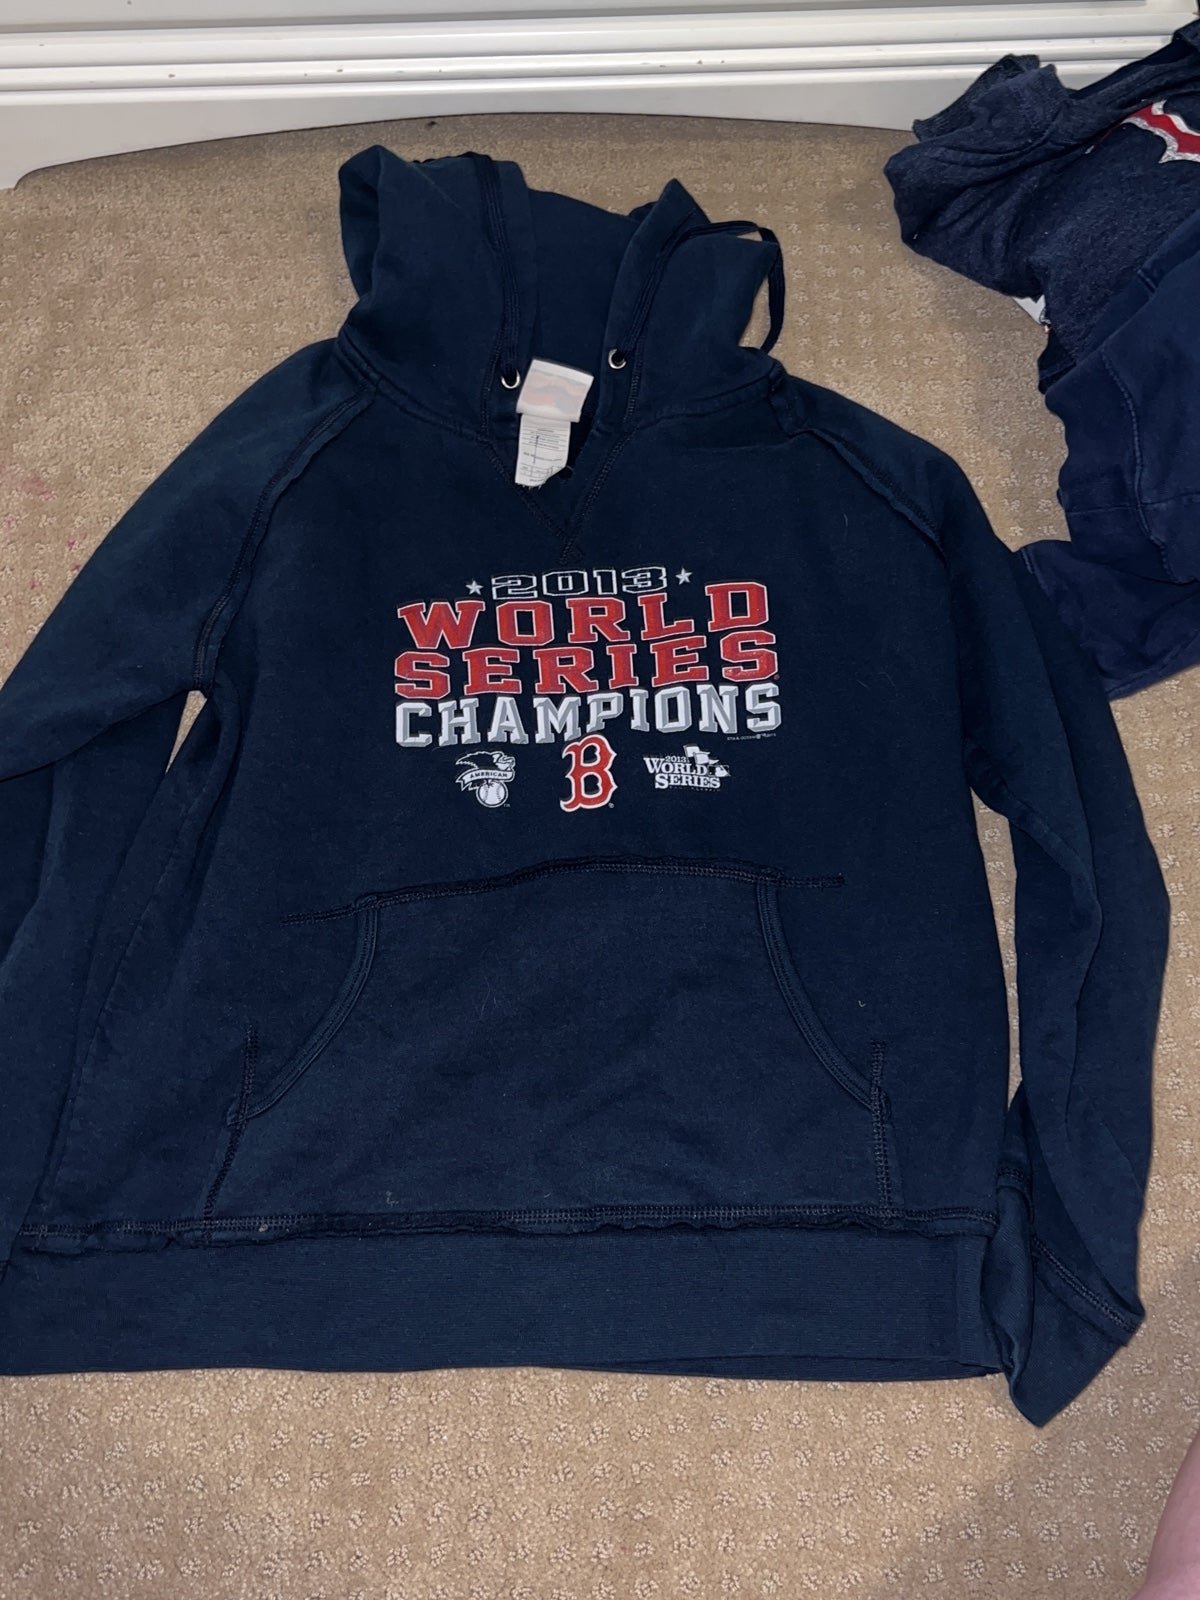 Custom Women’s Red Sox Sweatshirt size large jV2N4qqZo all for you